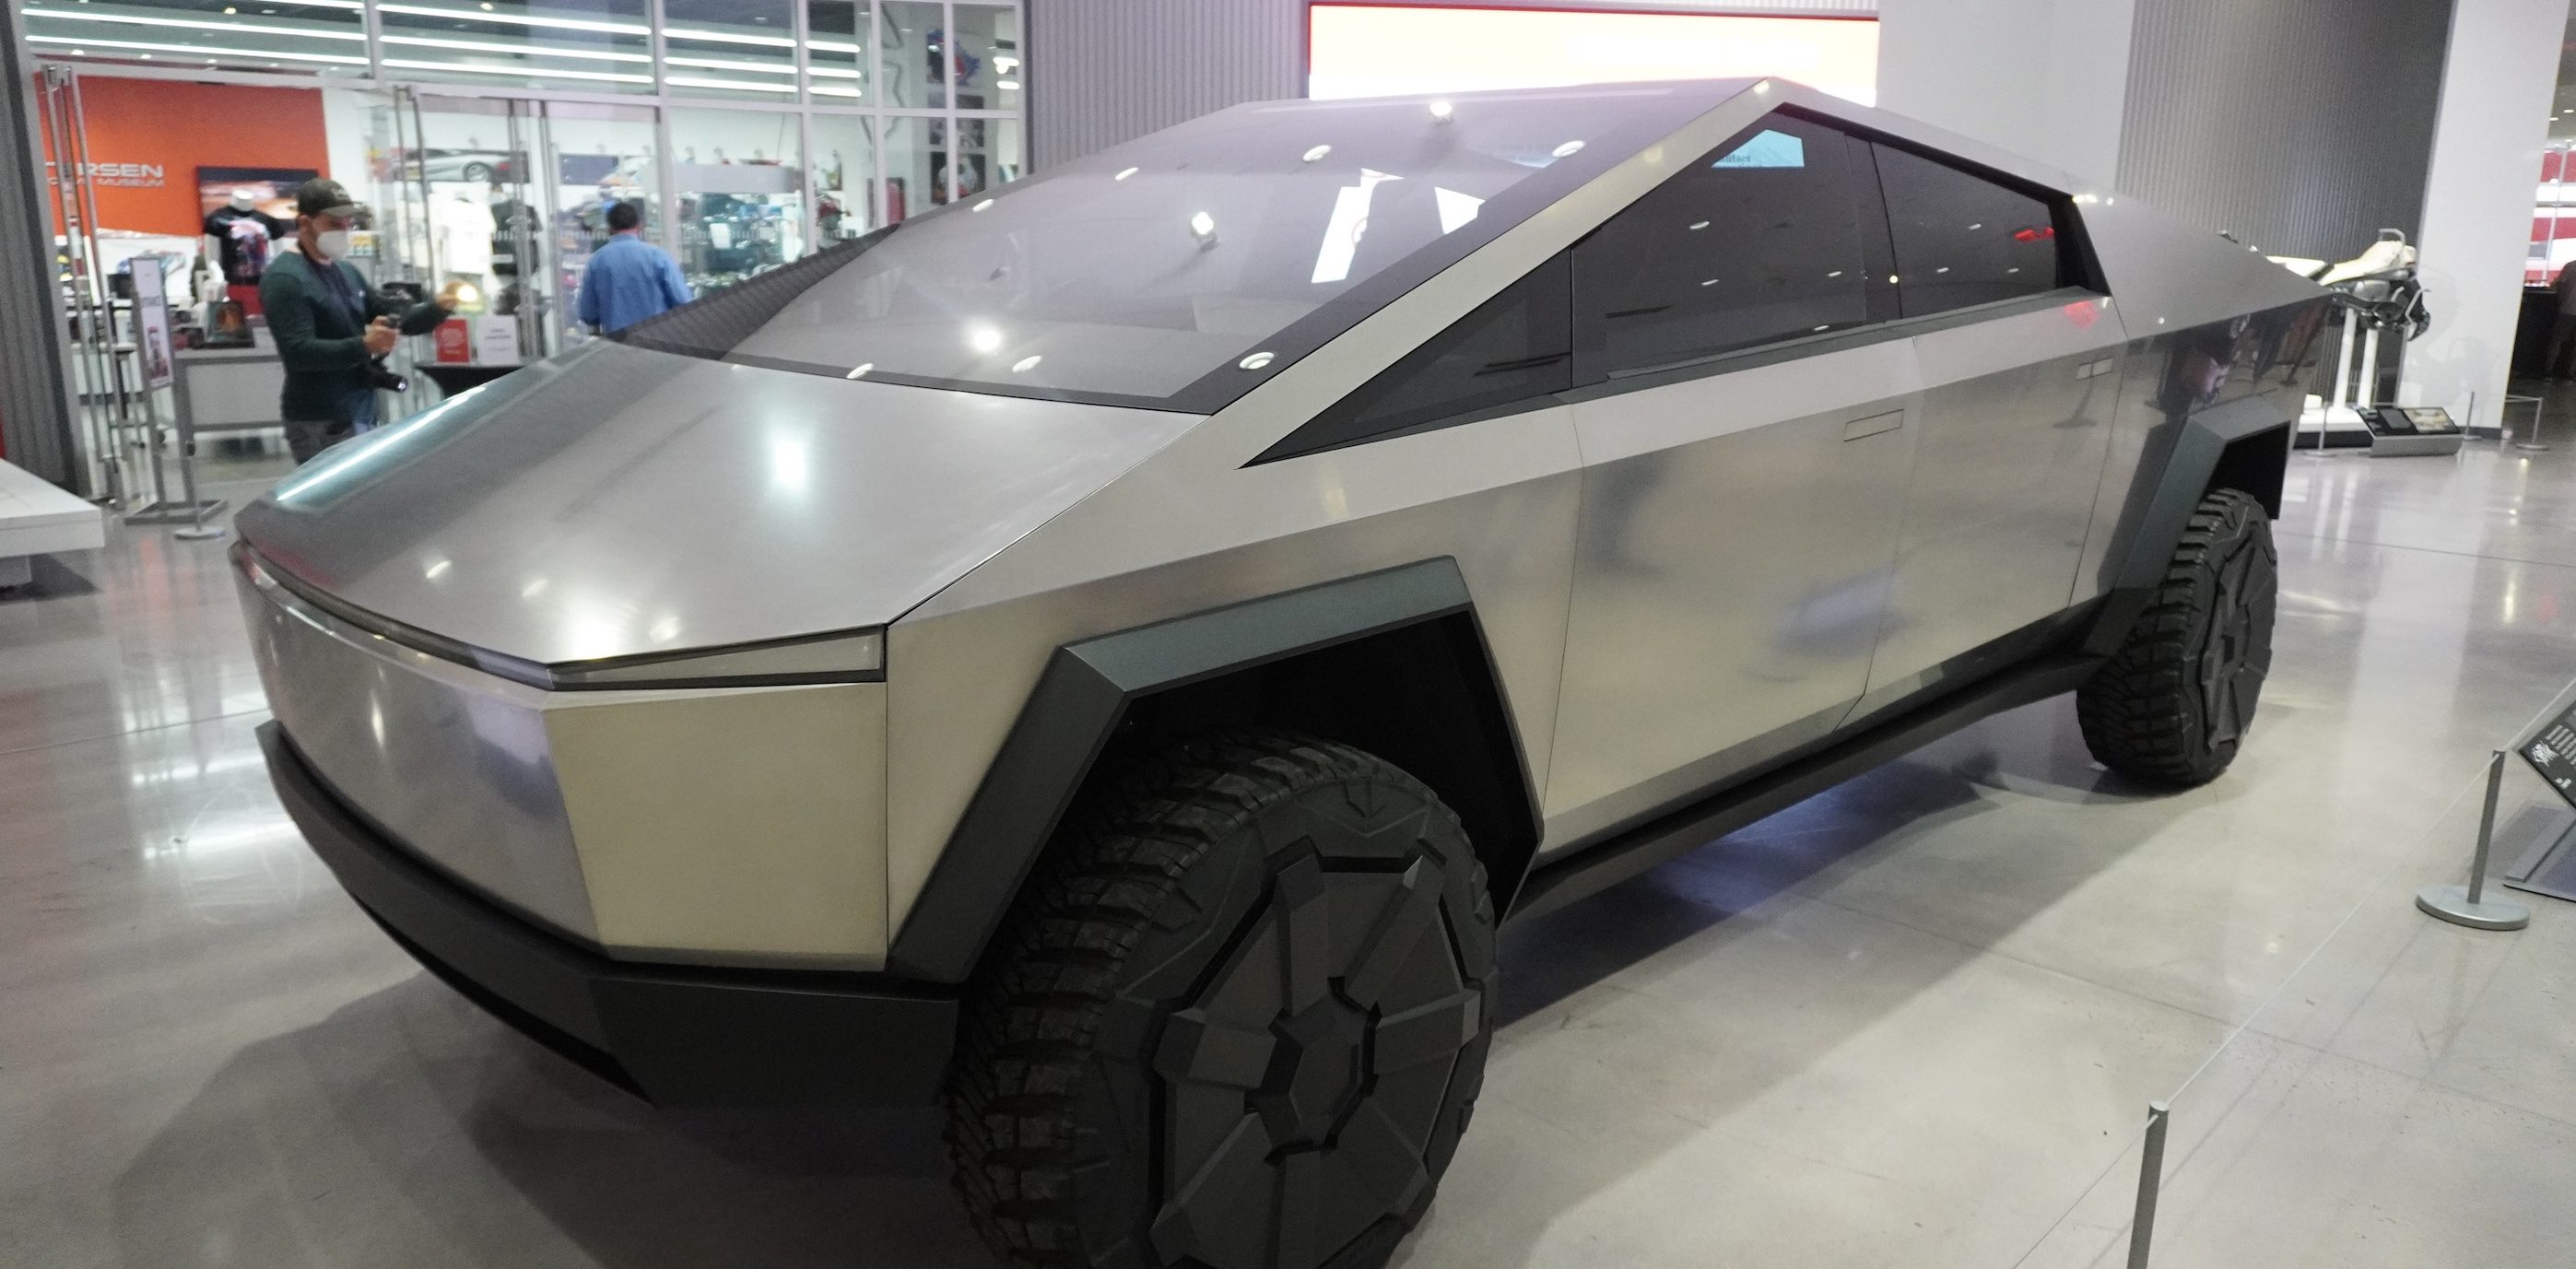 tesla cybertruck prototype close look public outing pictures